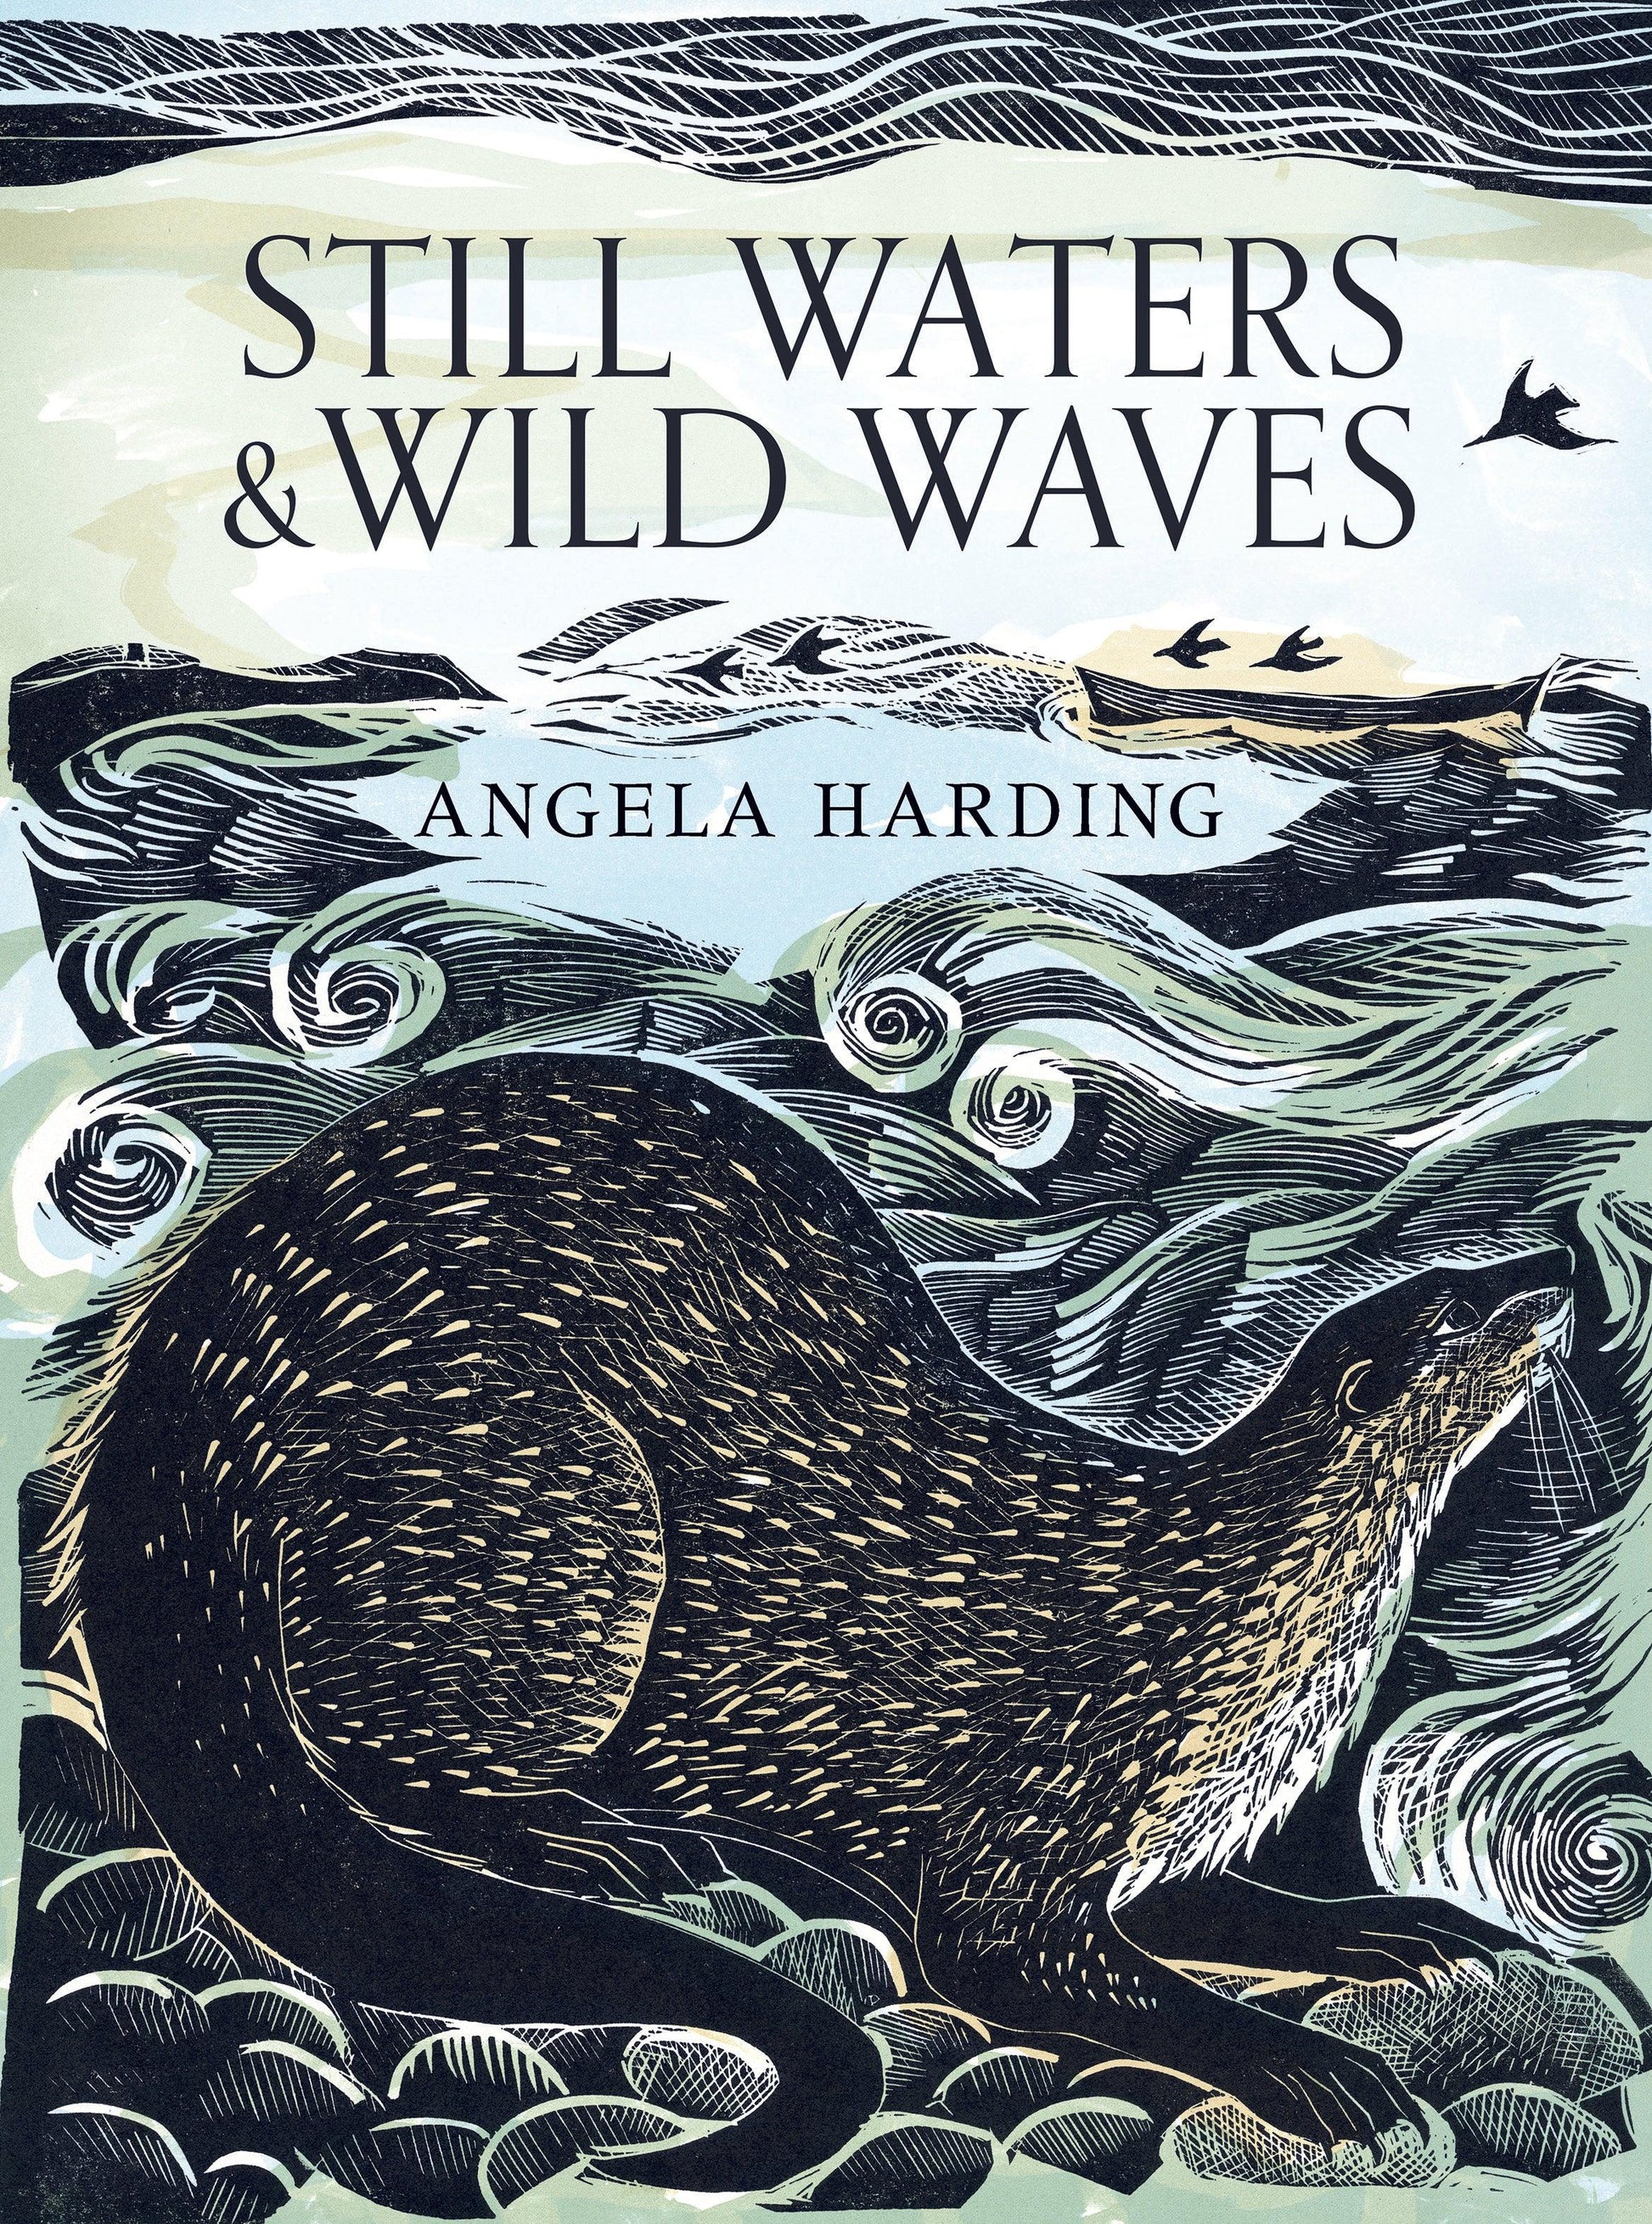 'Still Waters & Wild Waves' by Angela Harding - Signed Edition - Pub. September 26th - The Cleeve Bookshop